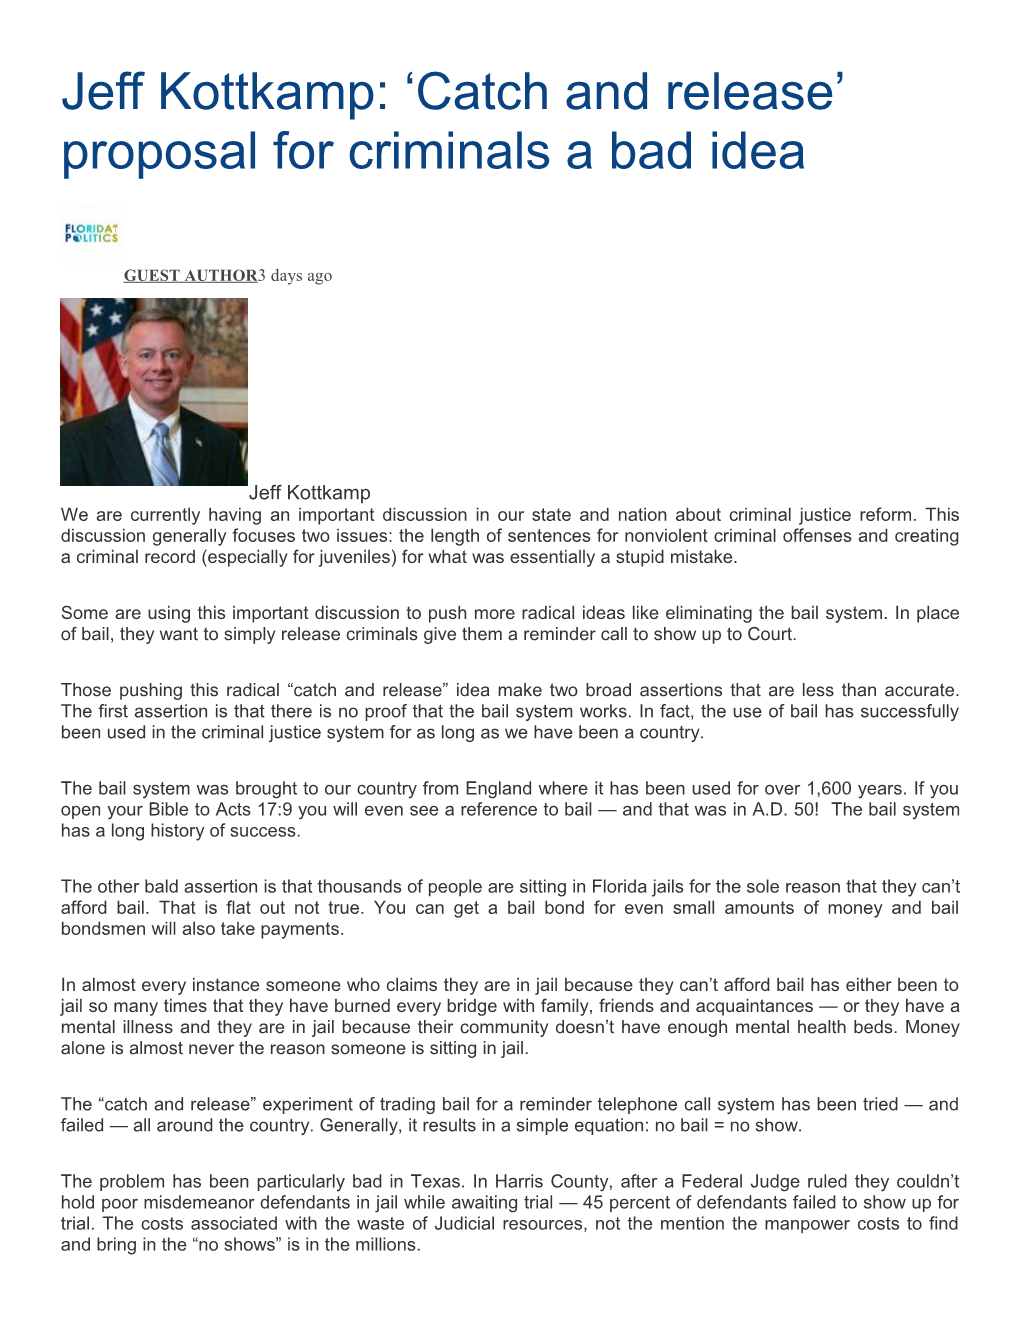 Jeff Kottkamp: Catch and Release Proposal for Criminals a Bad Idea